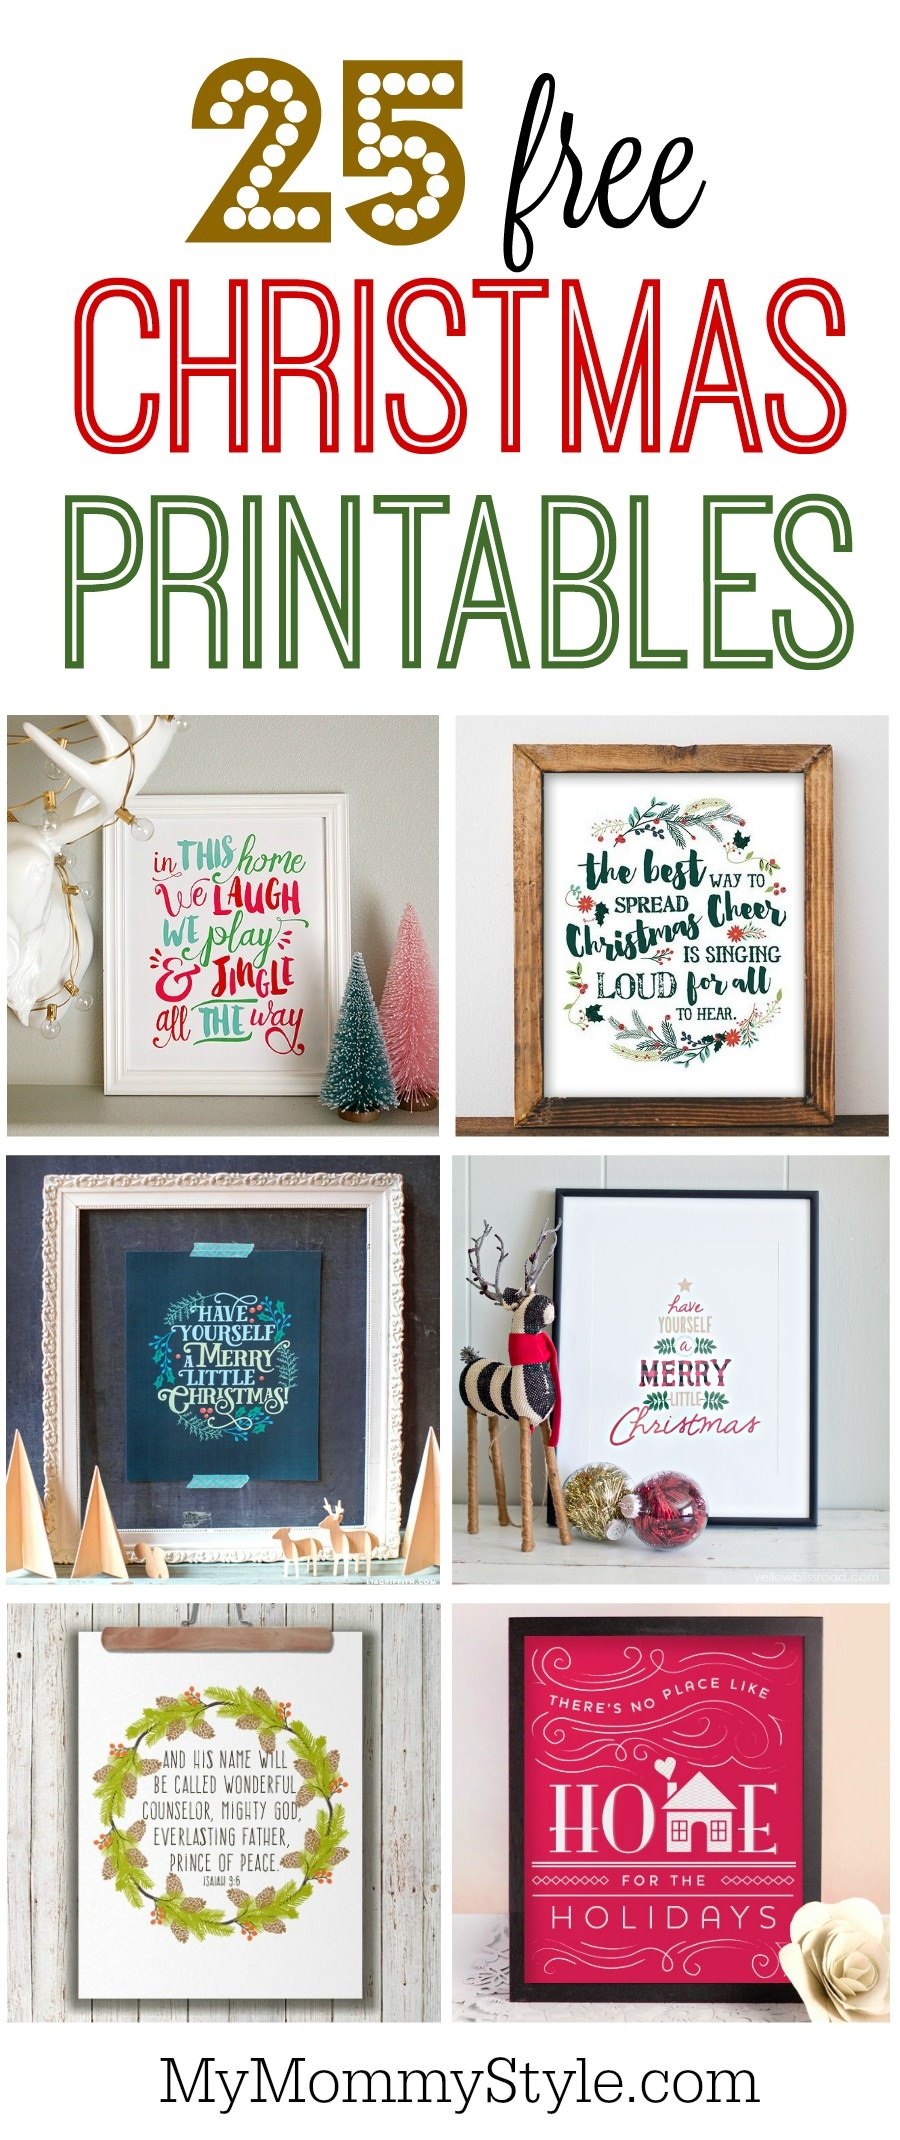 25 Free Christmas Printables - My Mommy Style - Free Printable Christmas Pictures